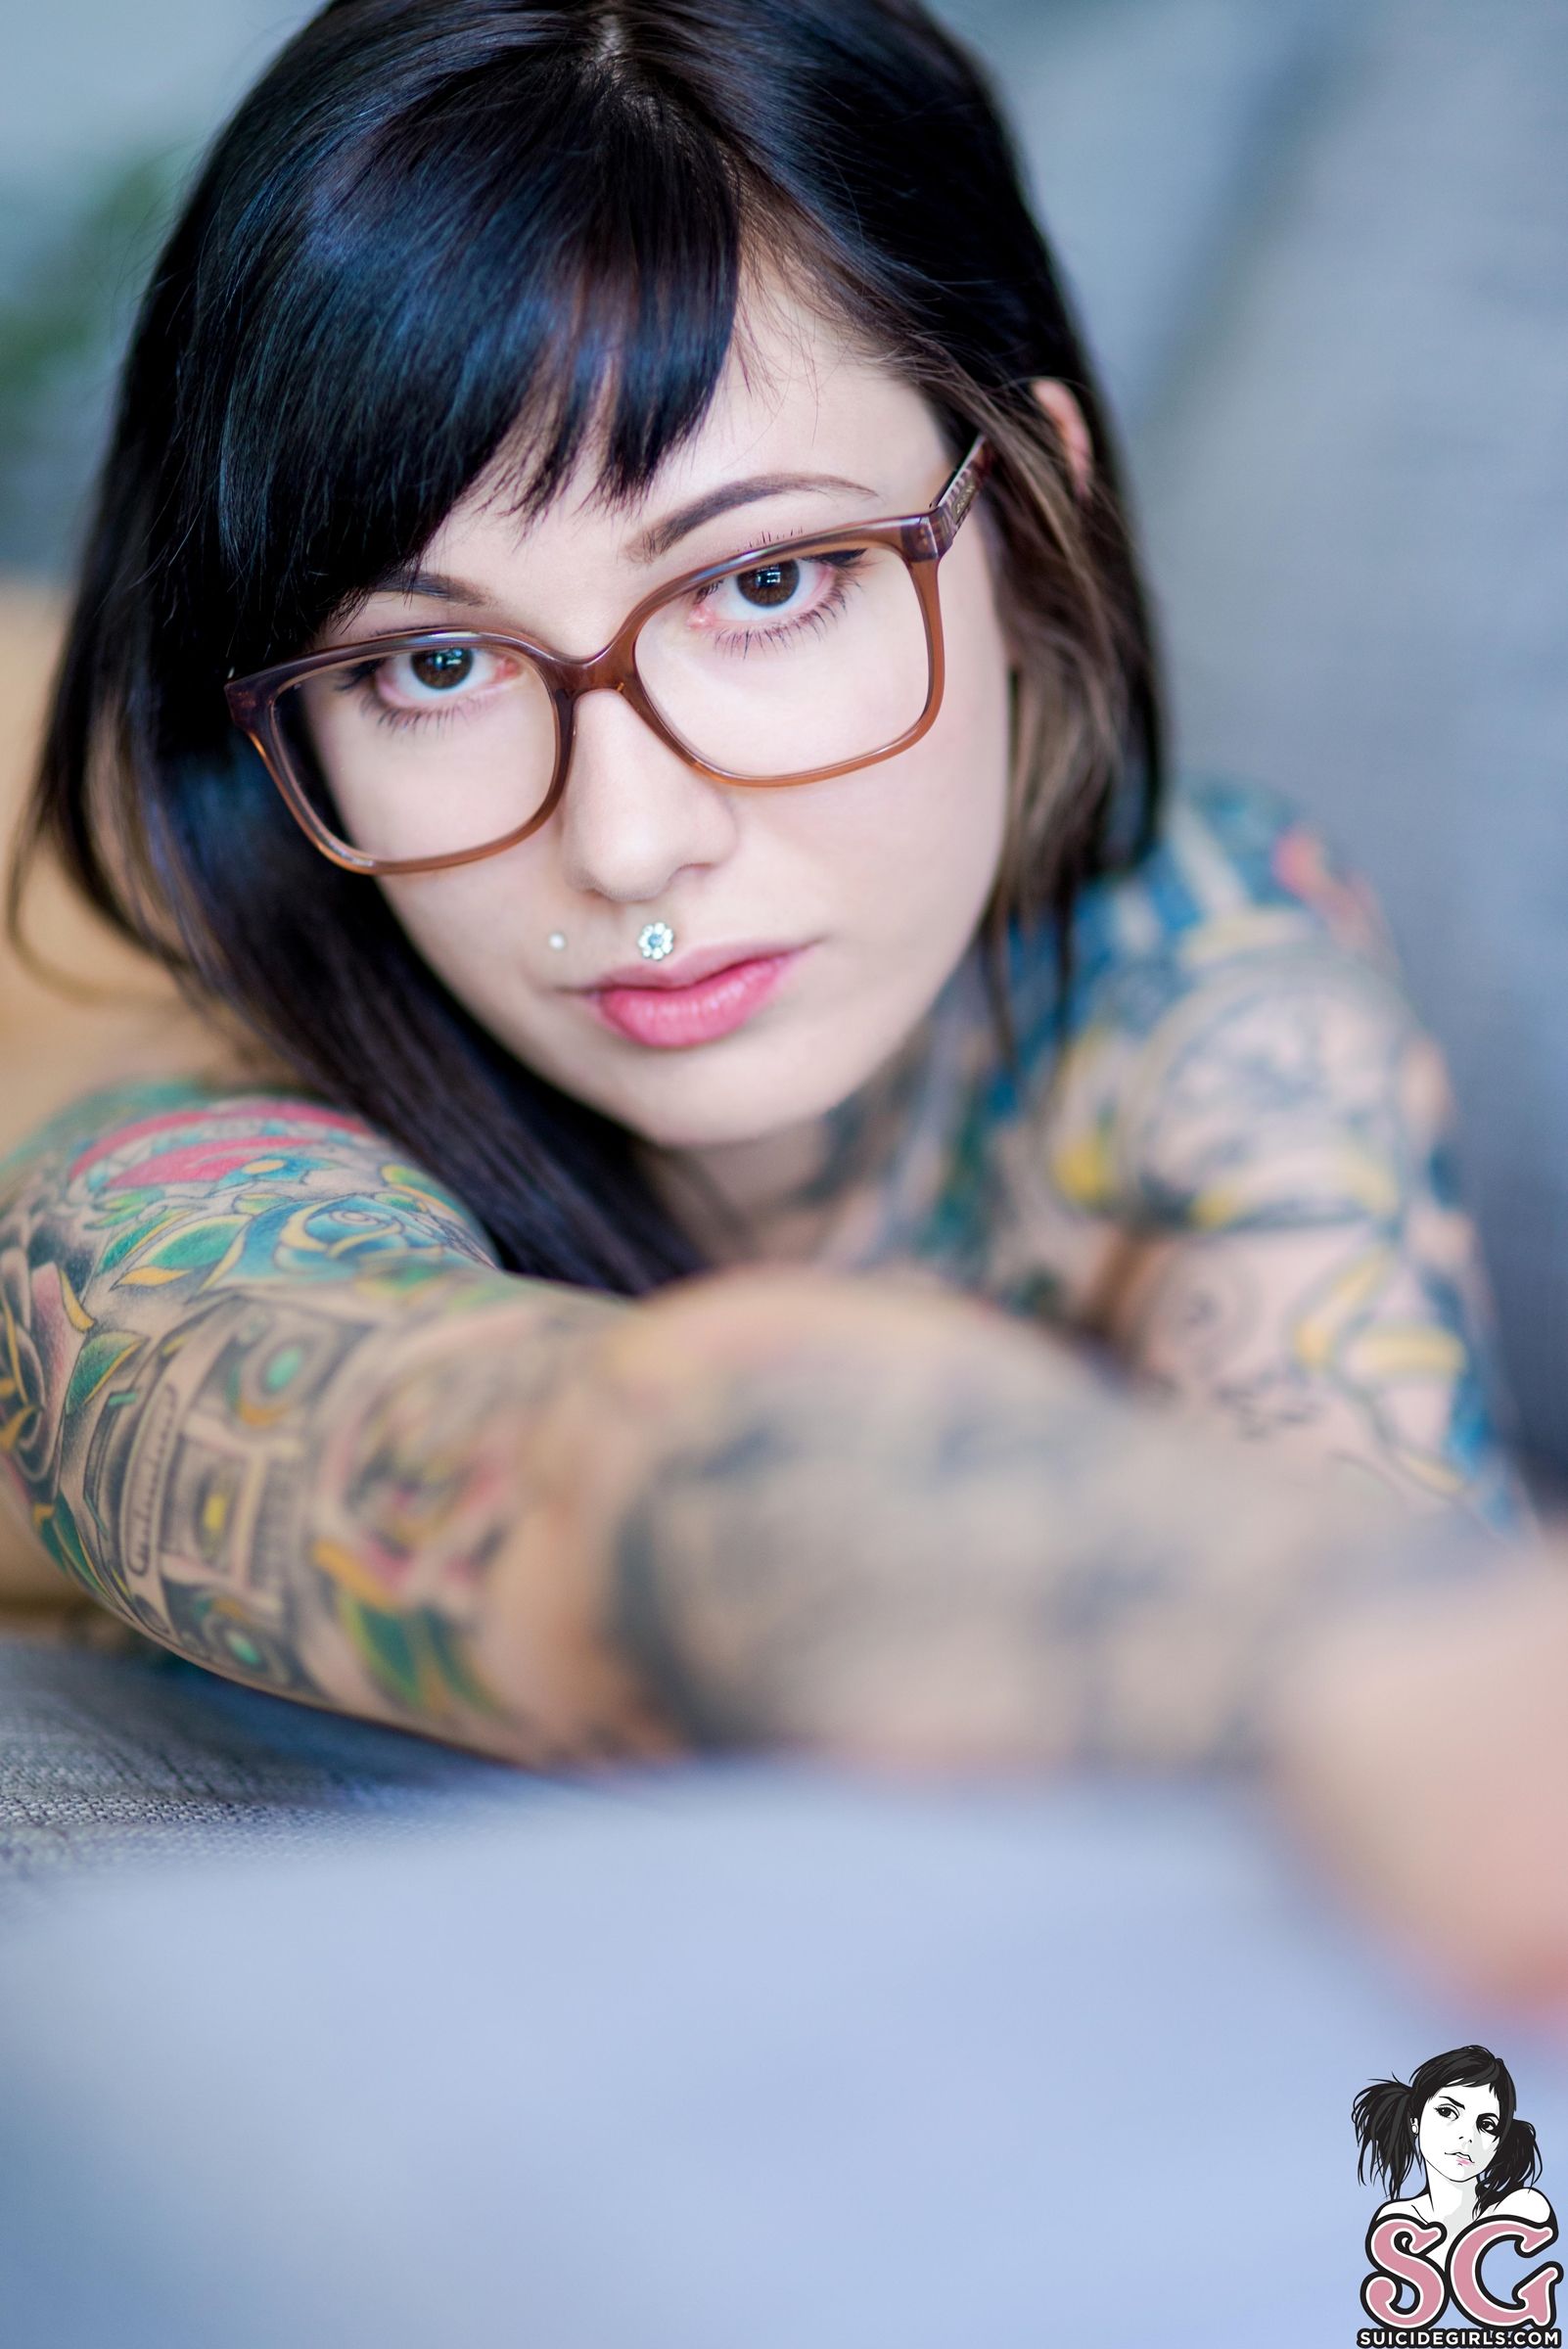 Beautiful Suicide Girl Exning Elegy To The Void (27) Amazing High resolutio...